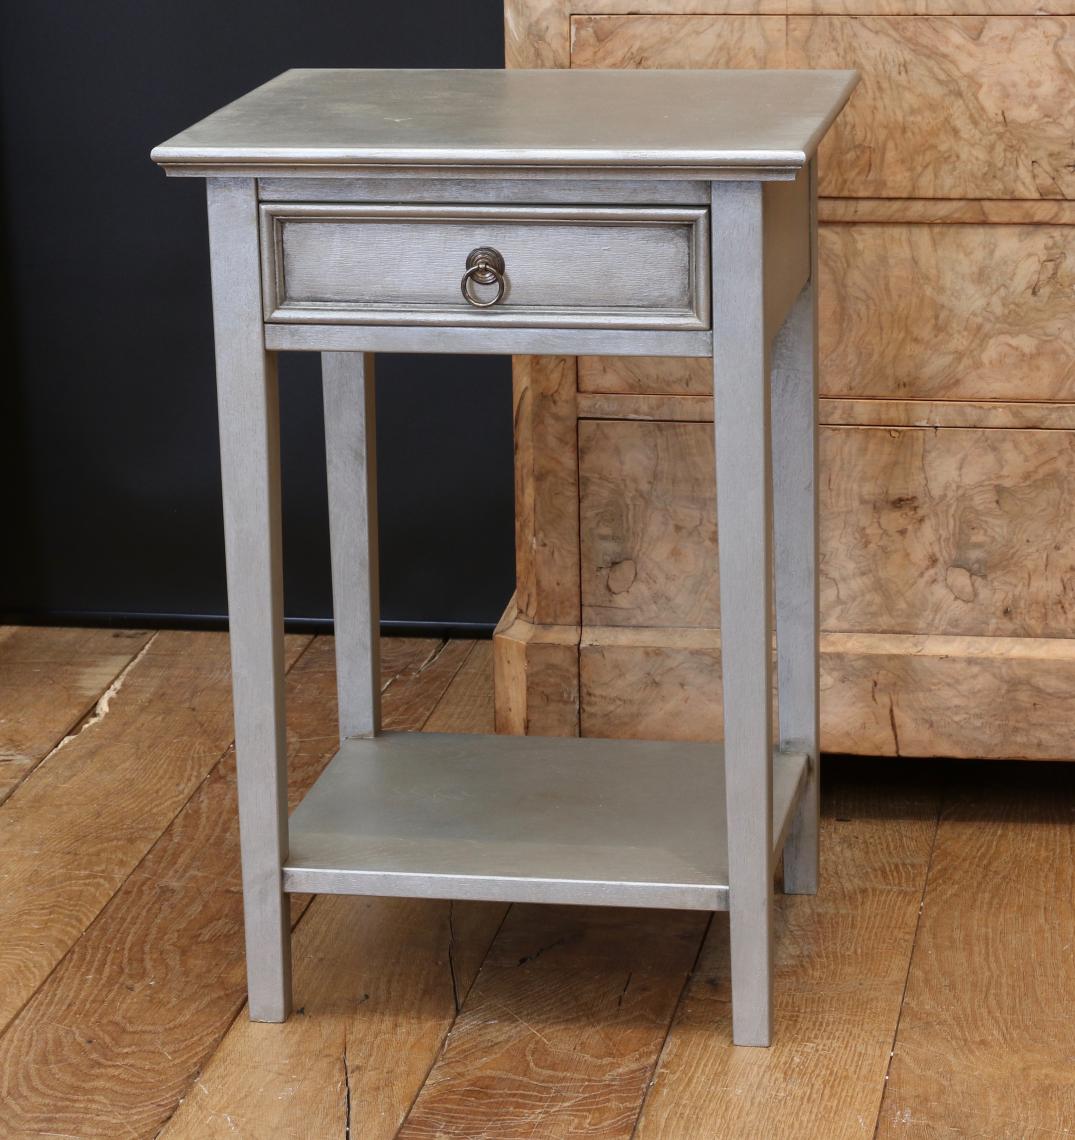 Bedside Table with a zinc finish